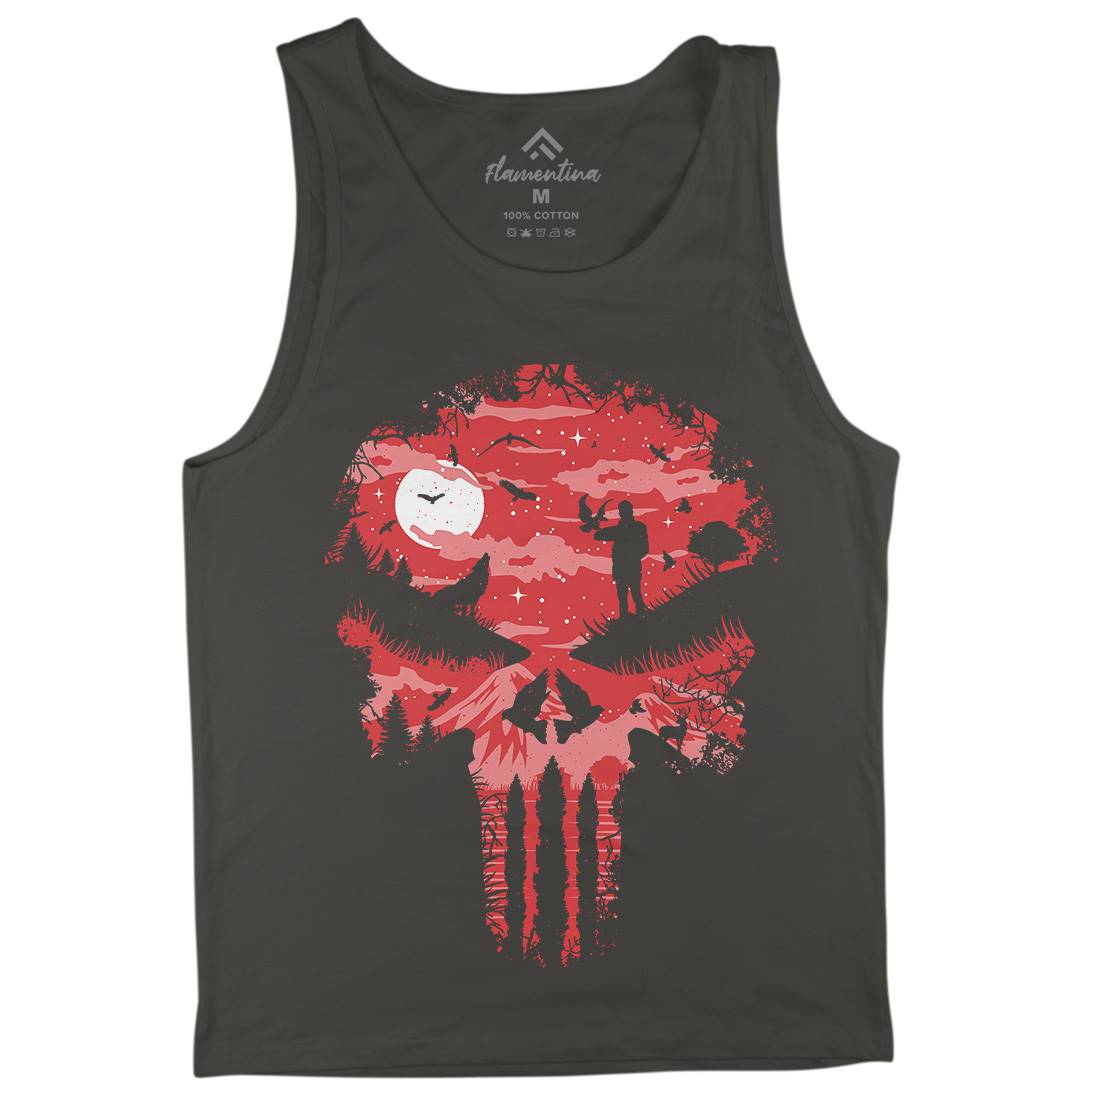 Stand And Bleed Mens Tank Top Vest Horror B085